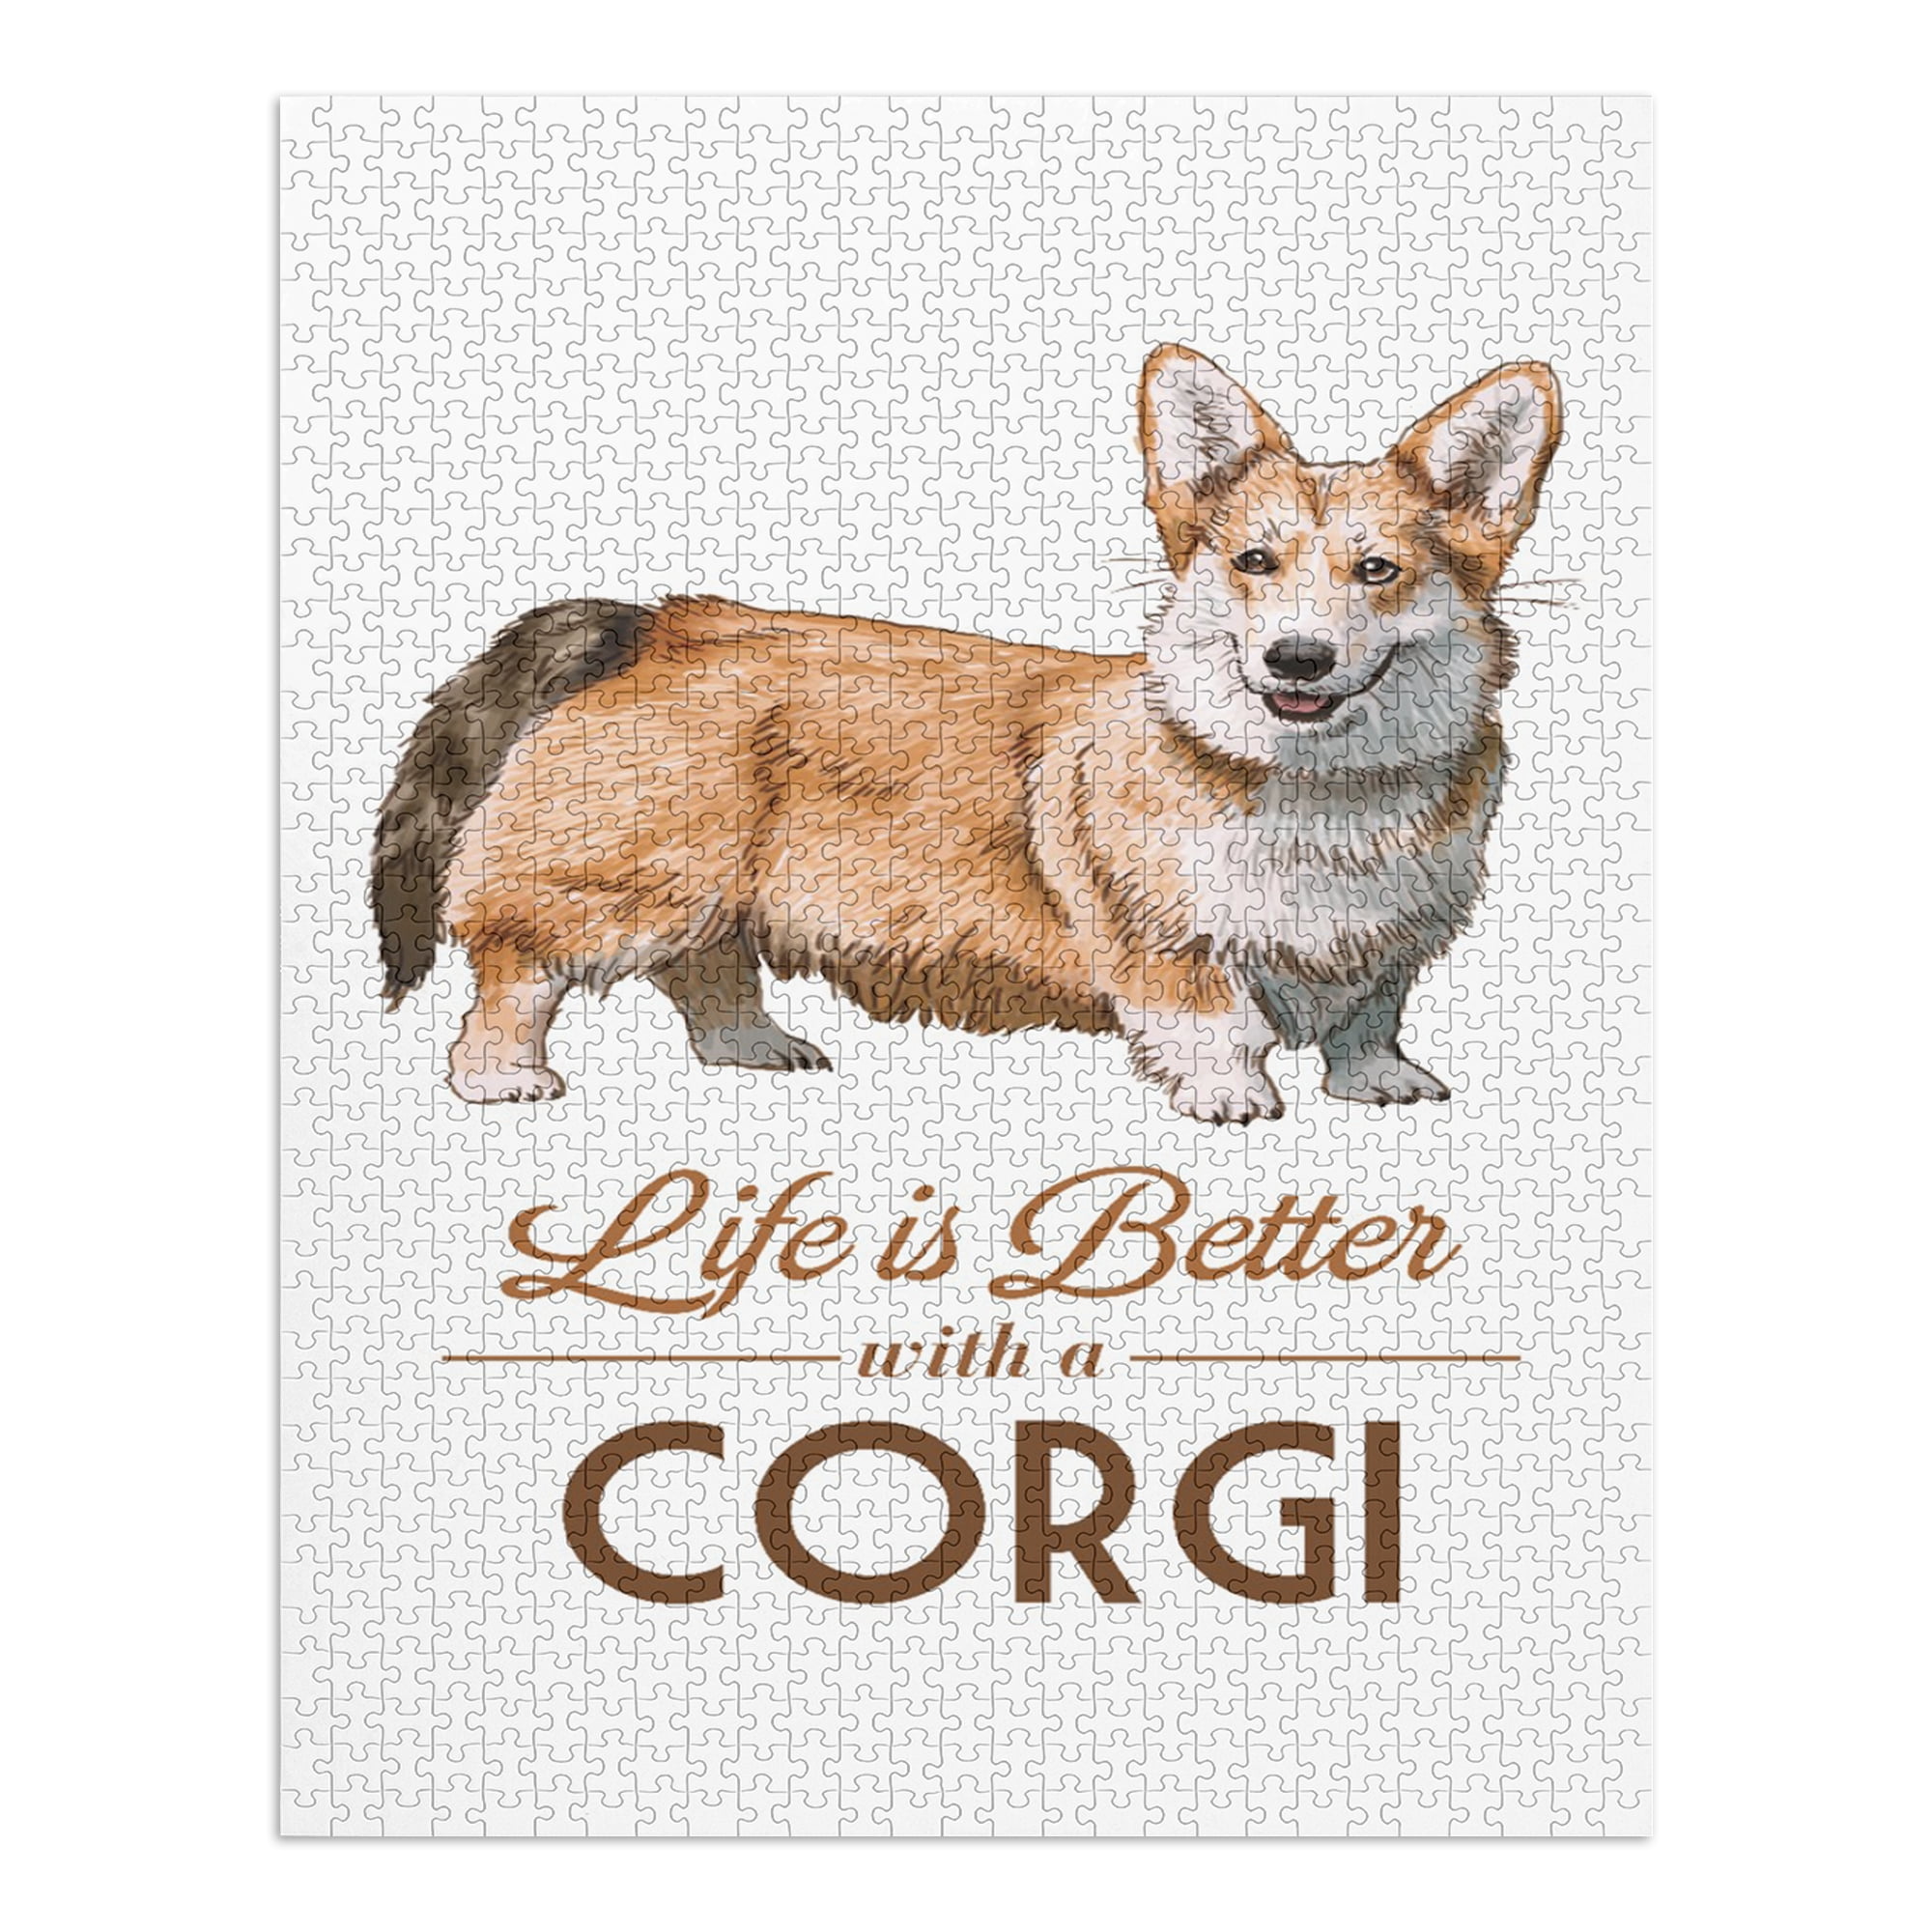 Corgi, Life is Better, White Background (1000 Piece Puzzle, Size 19x27,  Challenging Jigsaw Puzzle for Adults and Family, Made in USA)